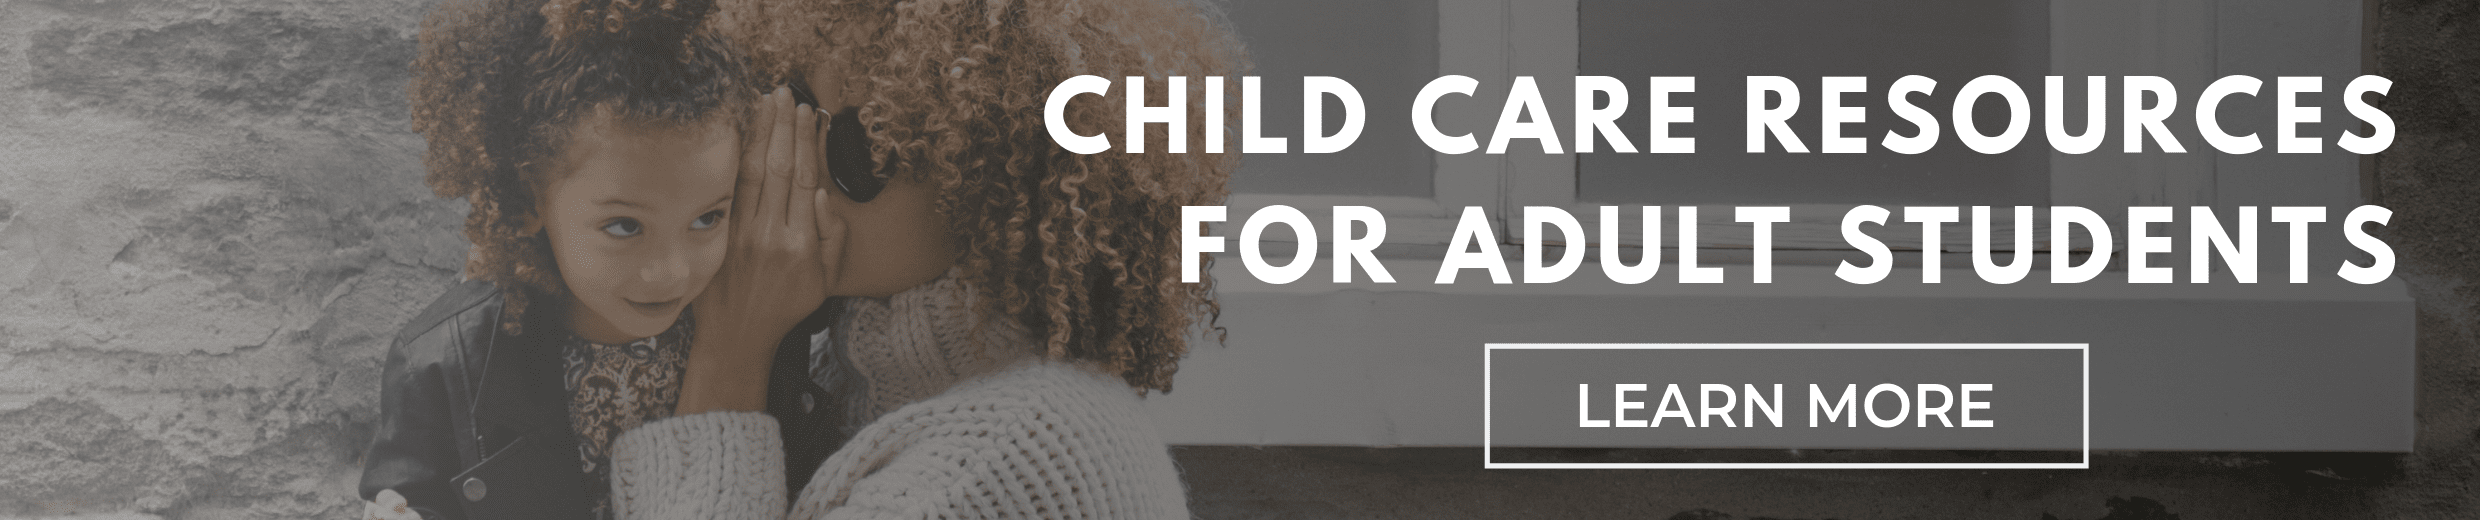 Child Care Resources for Adult Students